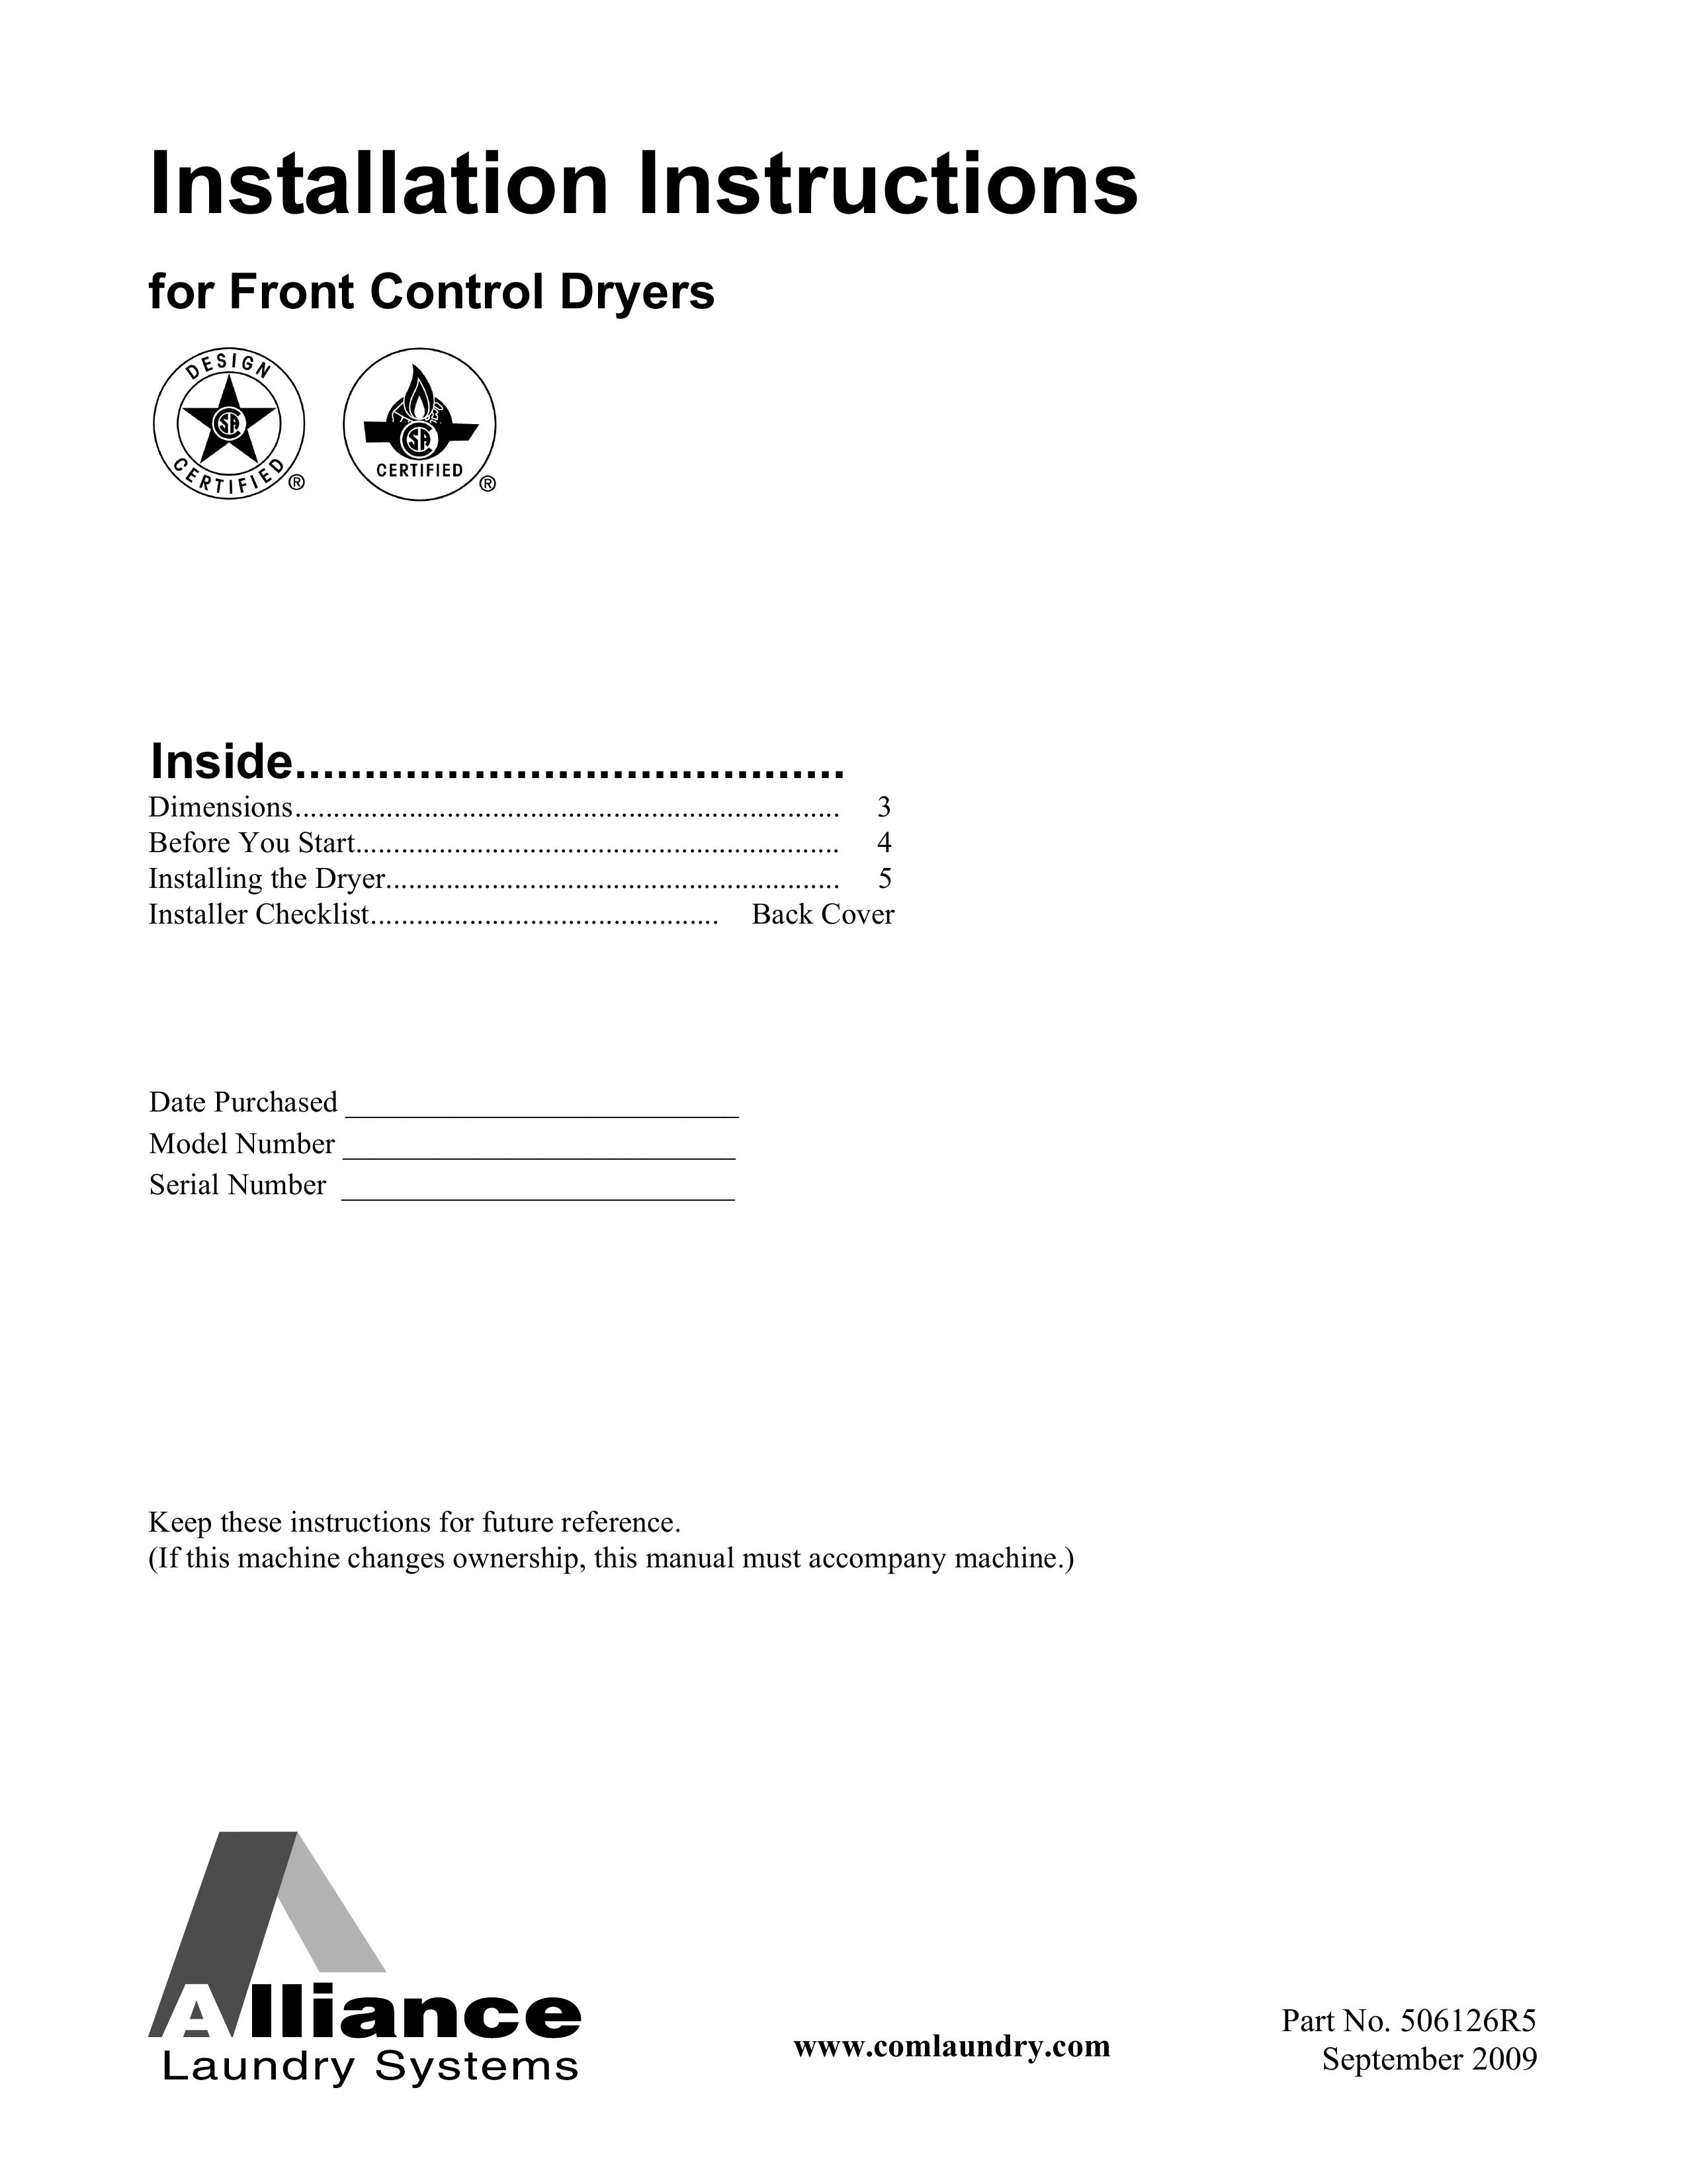 Alliance Laundry Systems Clothes Dryer Clothes Dryer User Manual